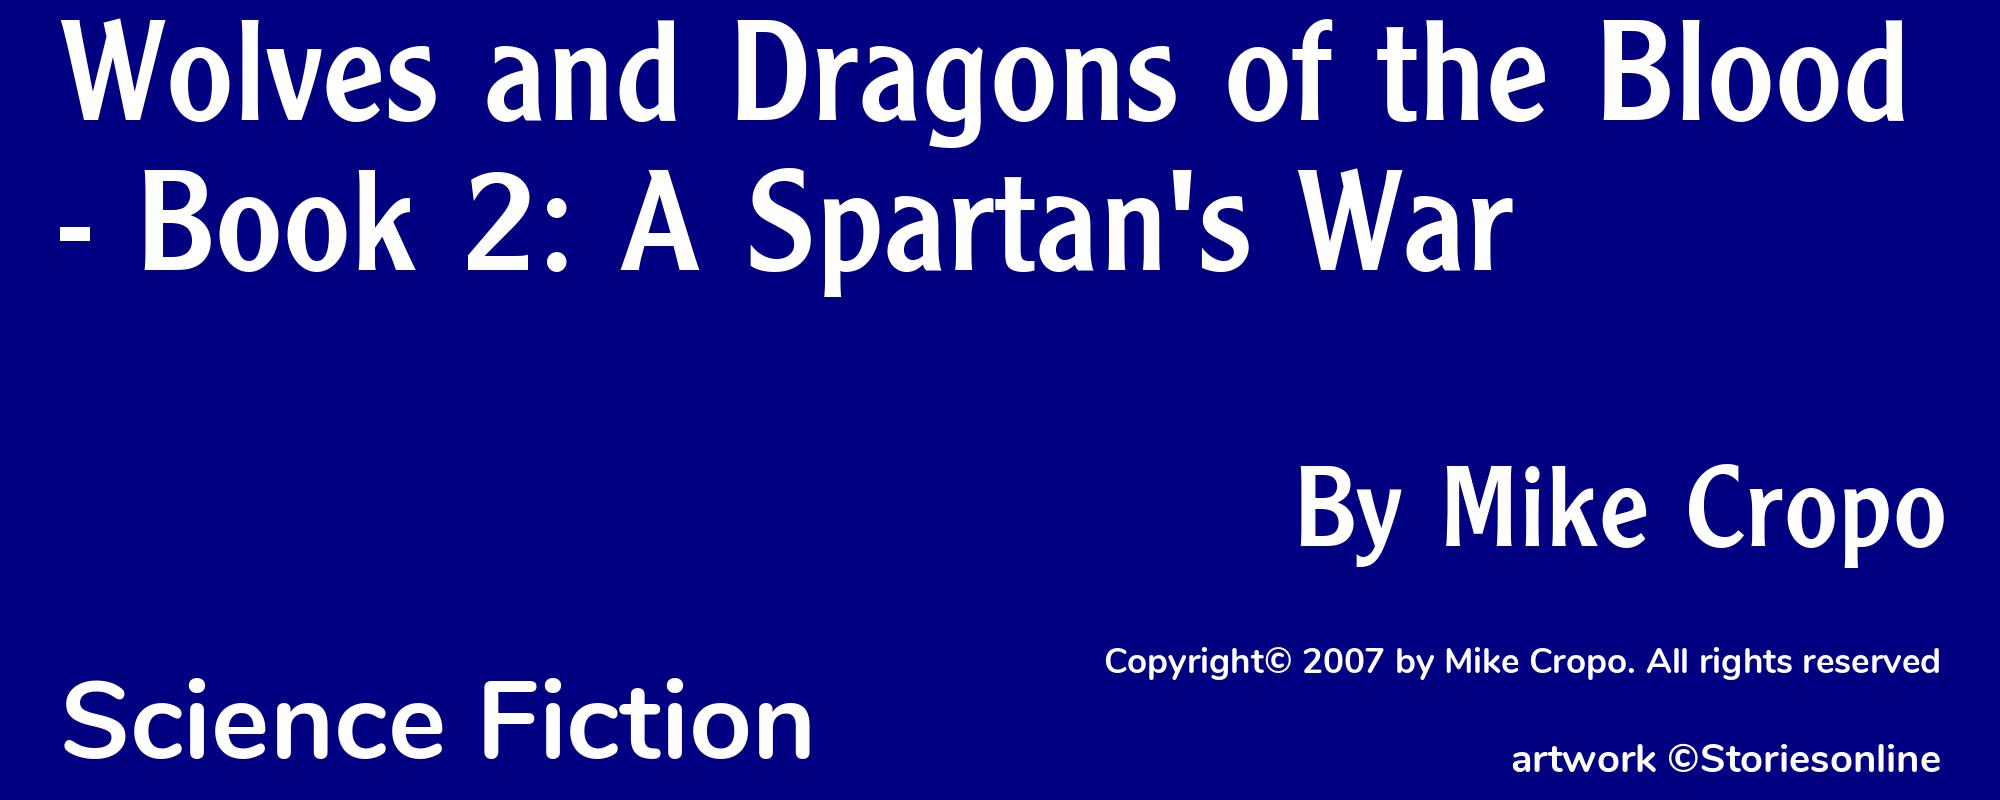 Wolves and Dragons of the Blood - Book 2: A Spartan's War - Cover